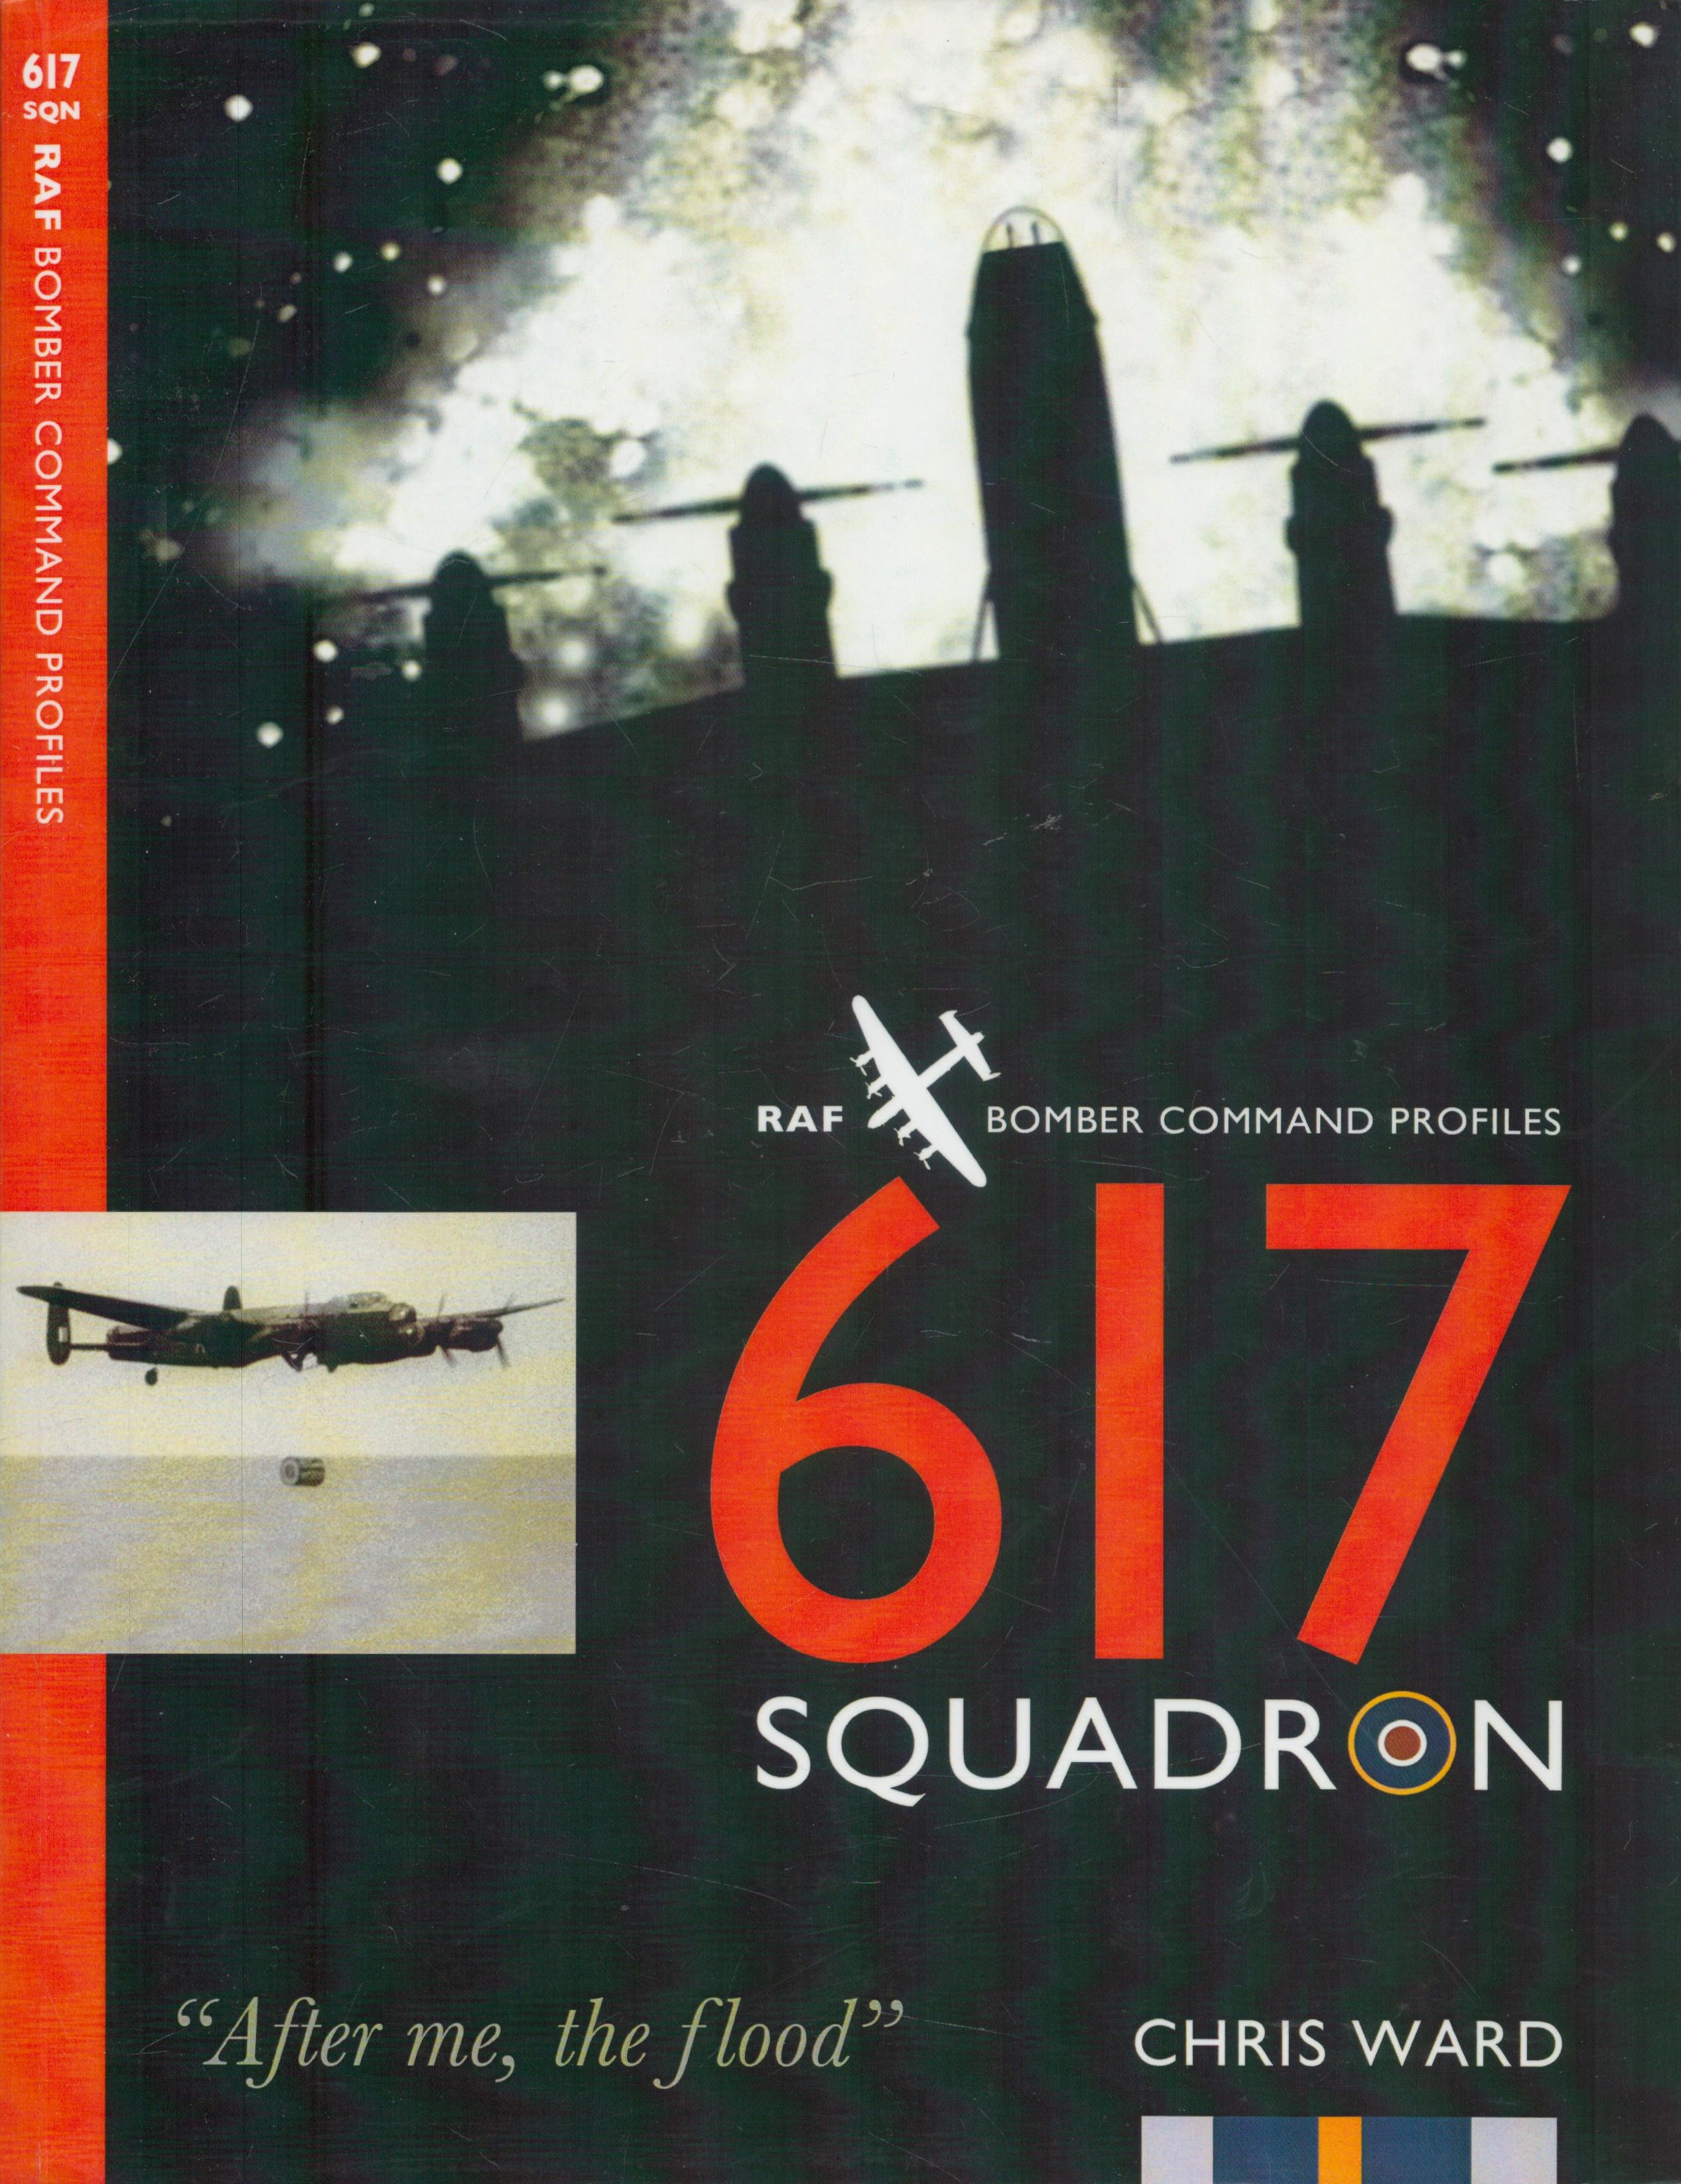 RAF Bomber Command Profiles: 617 Squadron by Chris Ward. Published in 2015. Paperback. Good